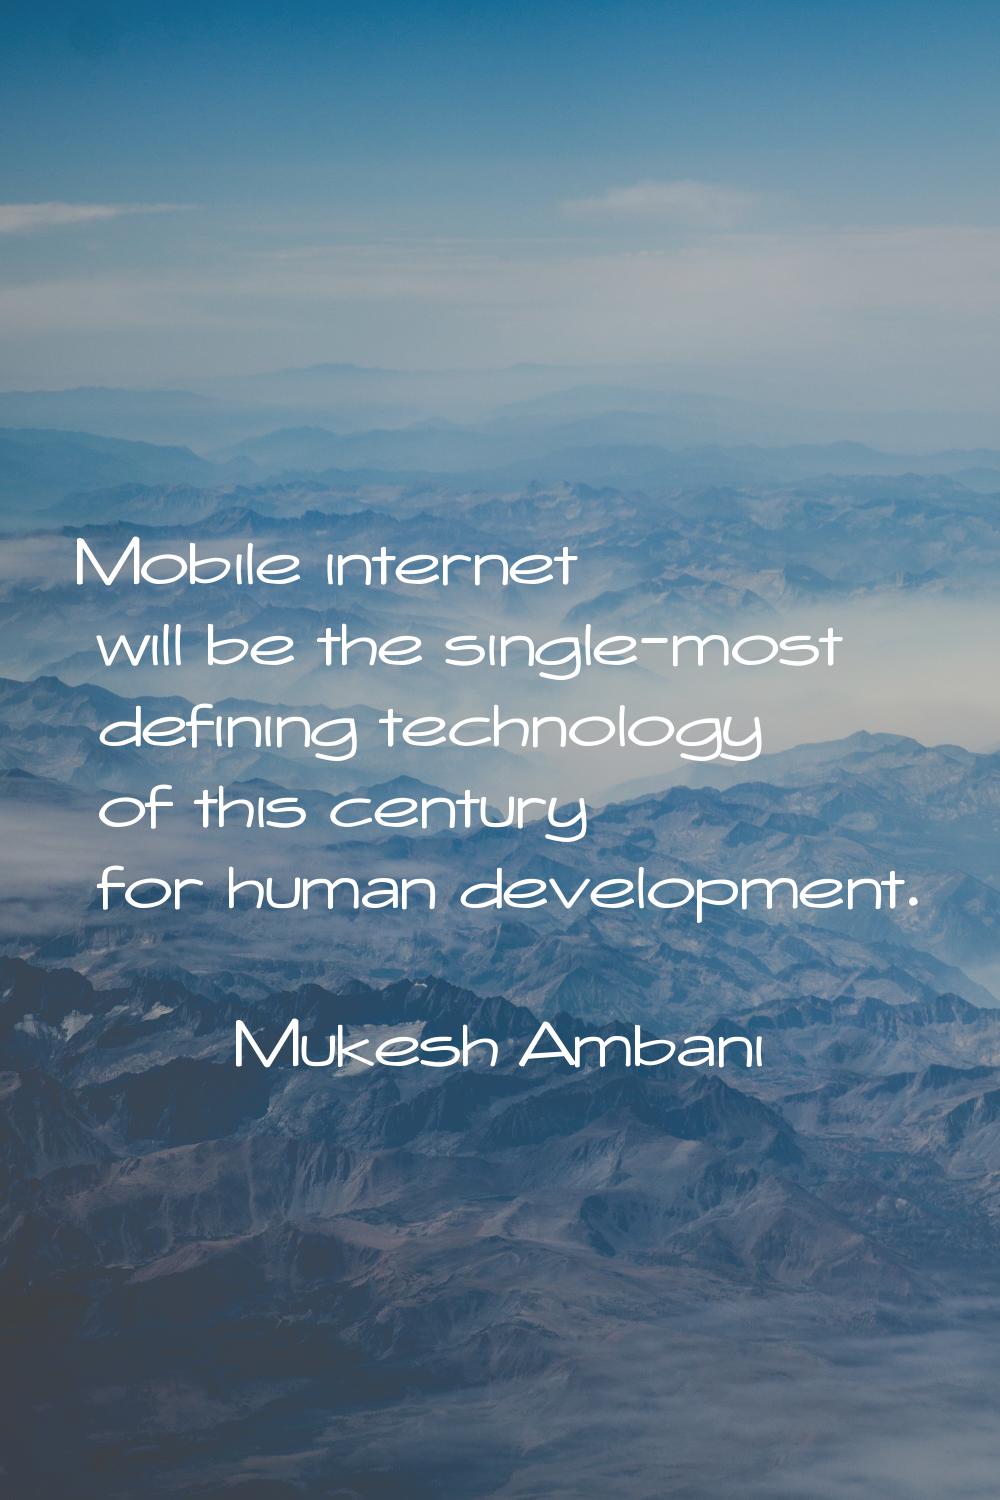 Mobile internet will be the single-most defining technology of this century for human development.